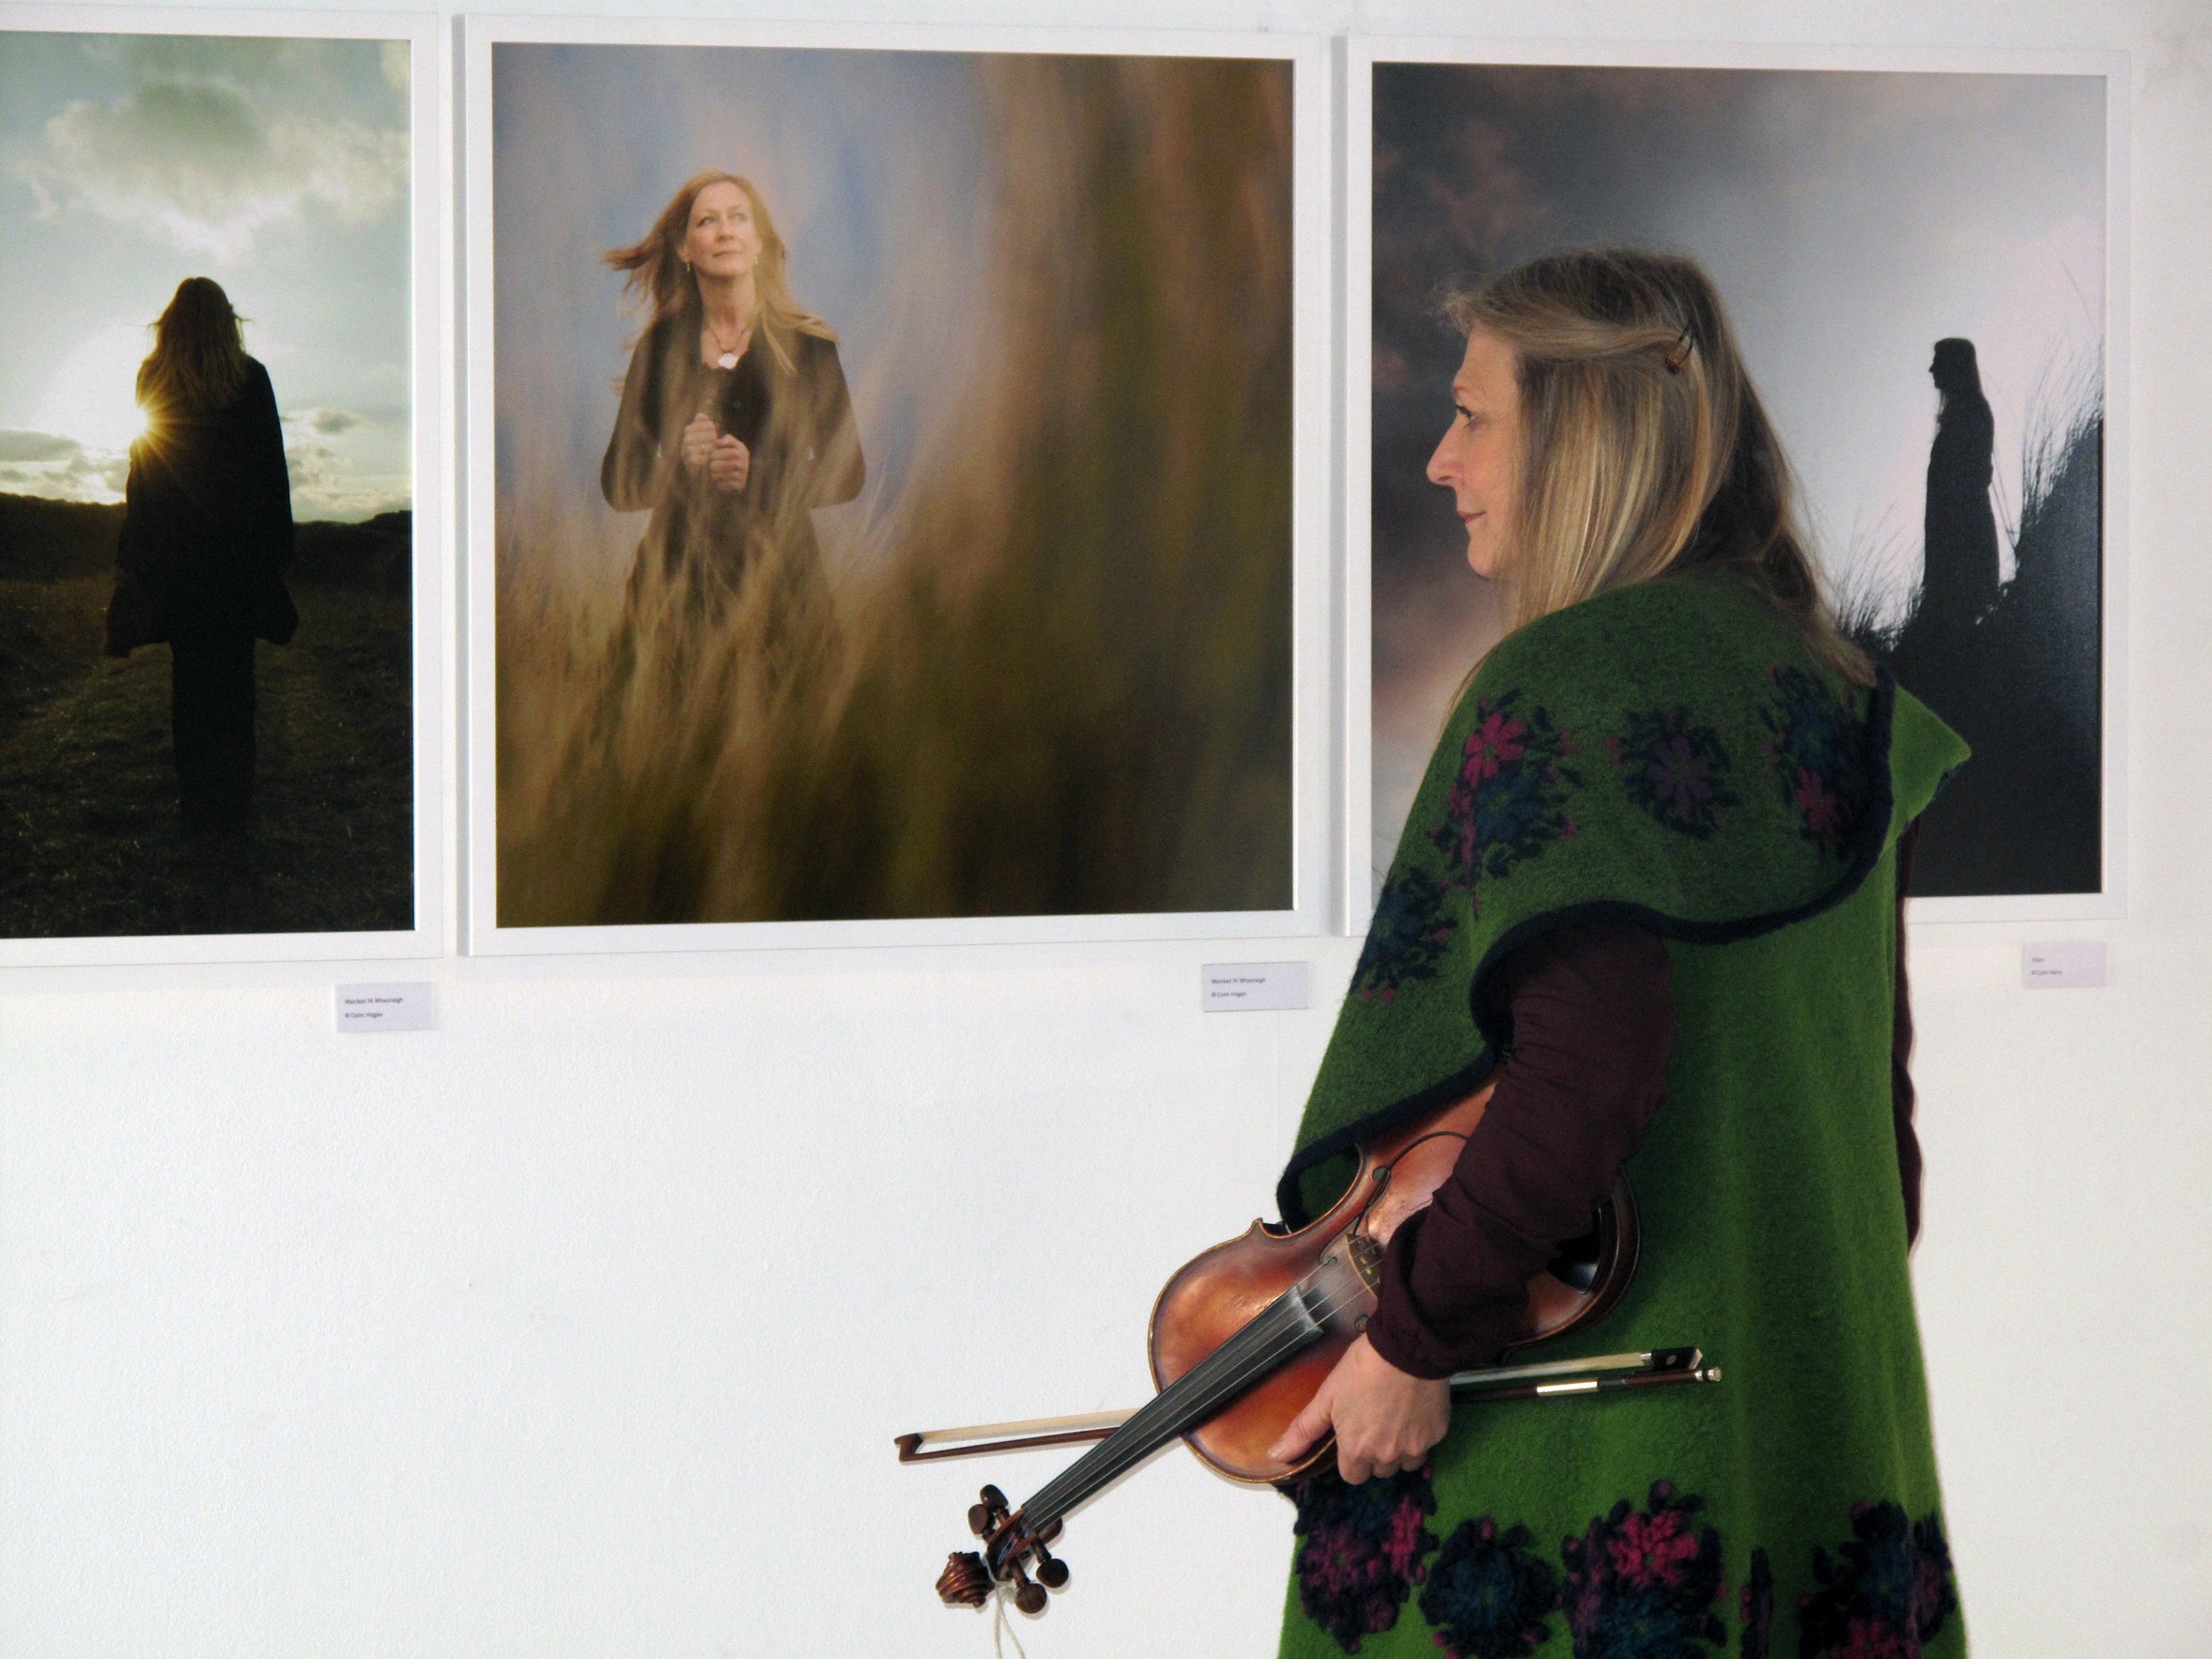  Musician Mairéad Ní Mhaonaigh at the exhibition in the Gallery of Photography 